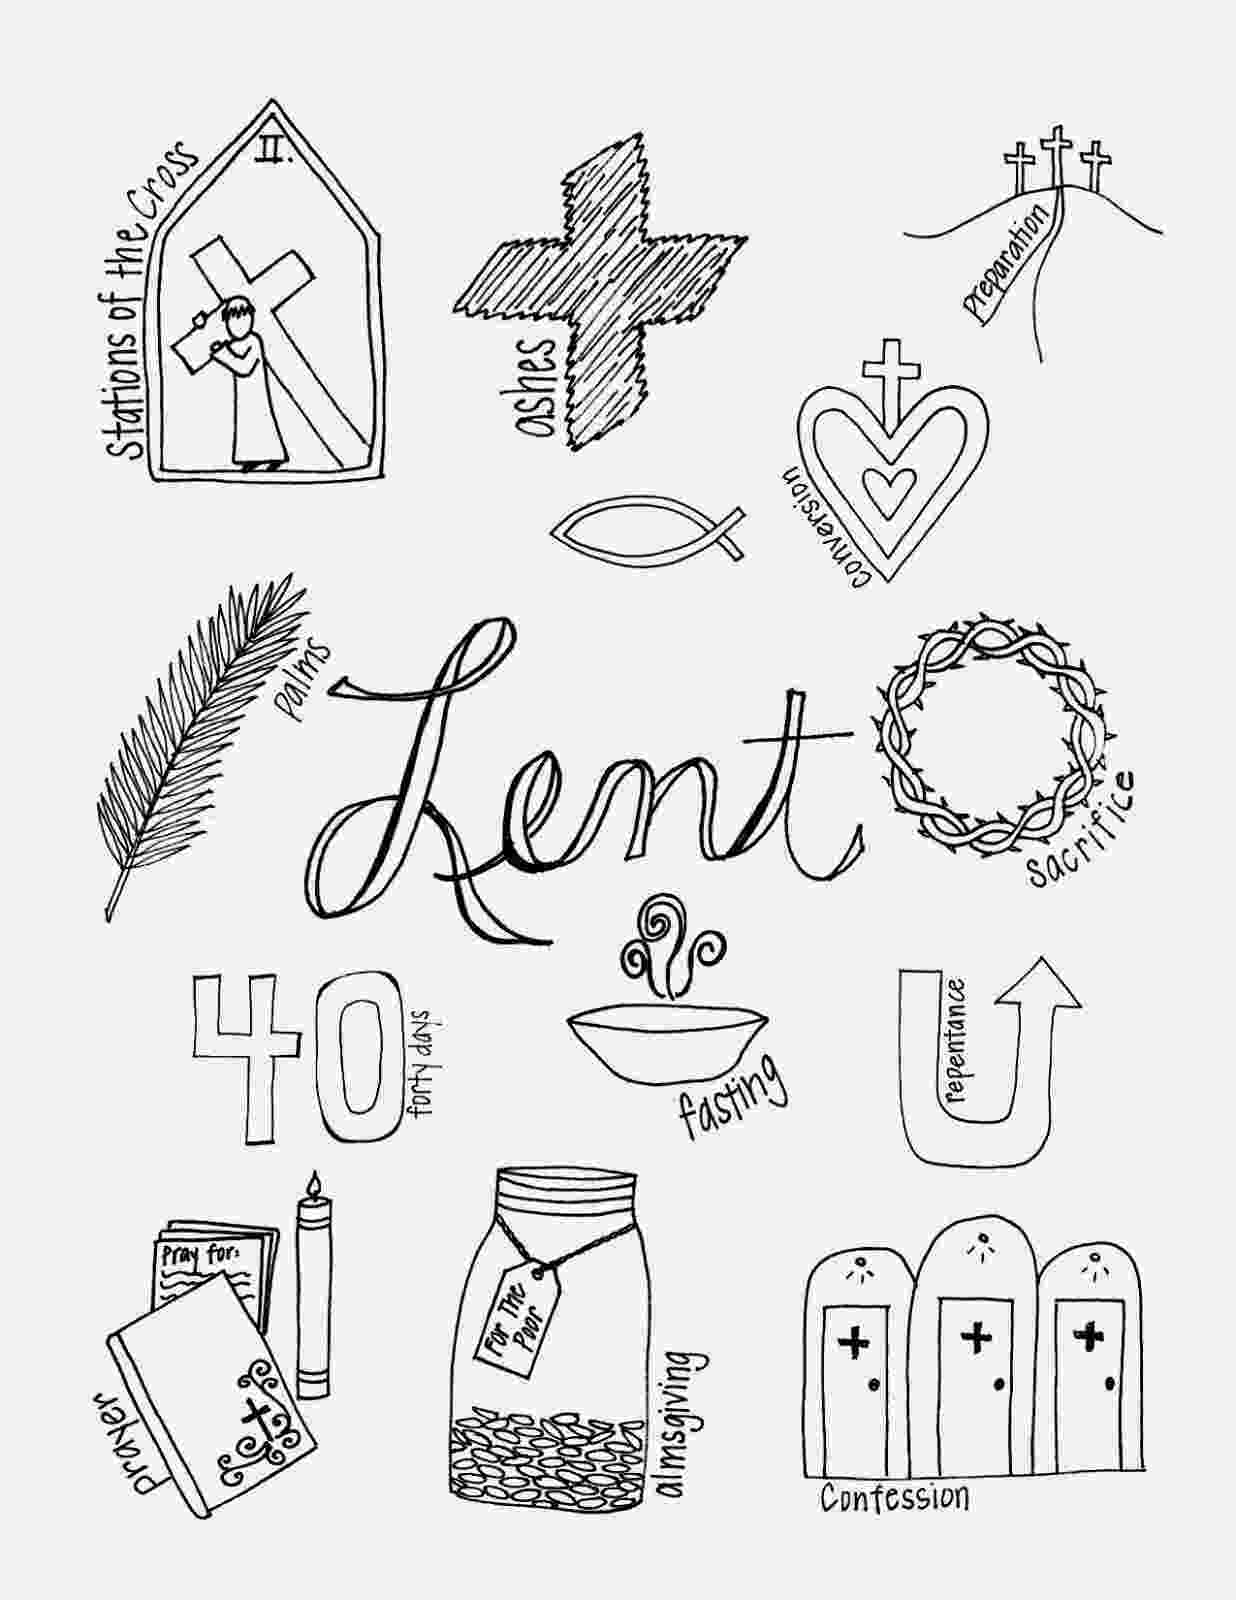 ash wednesday coloring pages ash wednesday coloring pages best coloring pages for kids ash wednesday coloring pages 